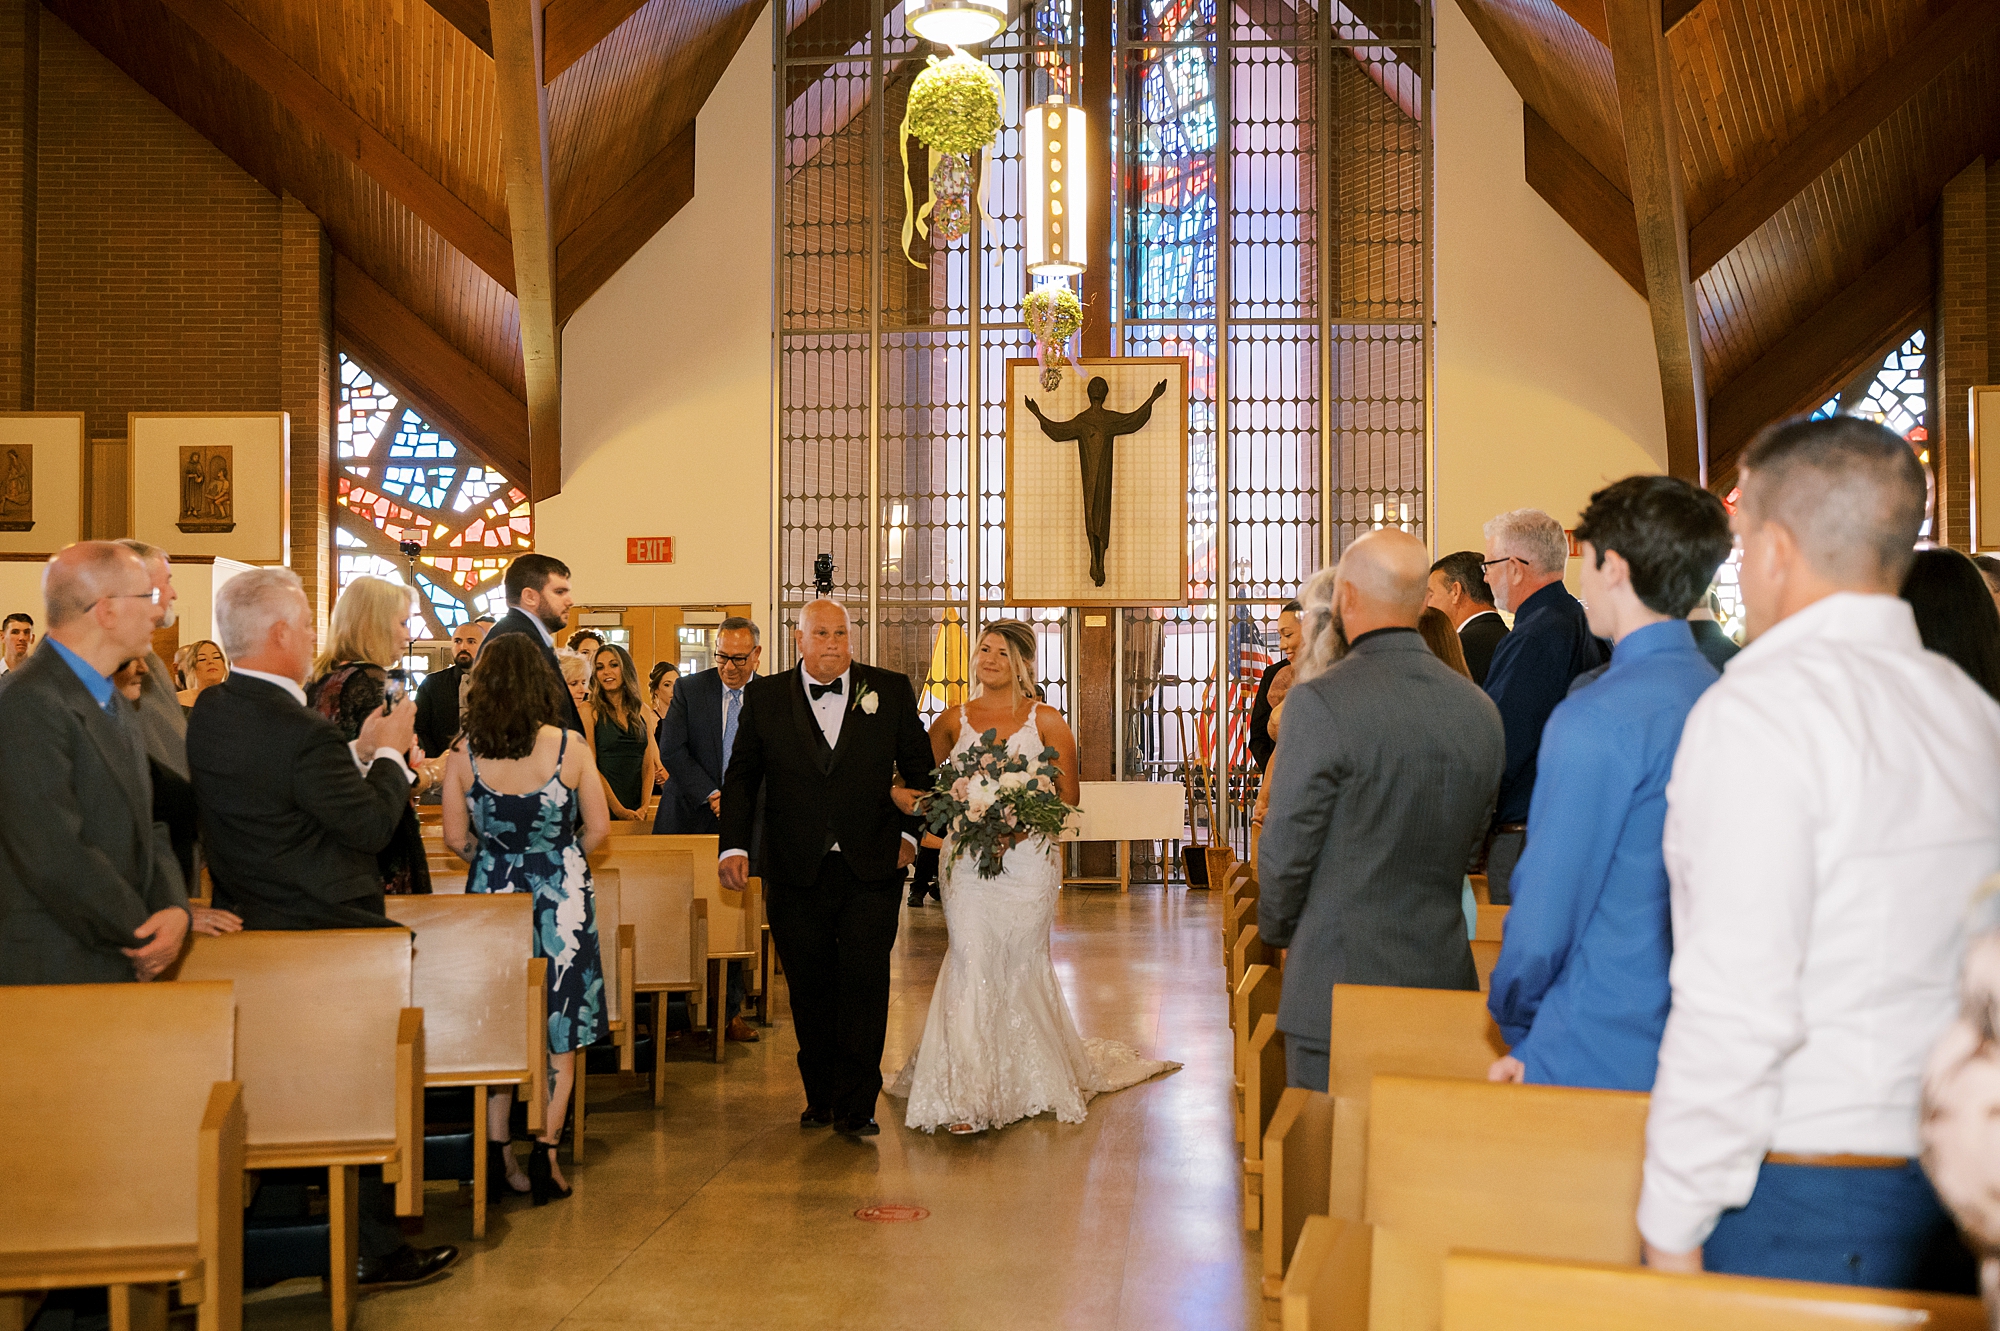 bride walks down aisle with father during traditional church wedding ceremony in New Jersey